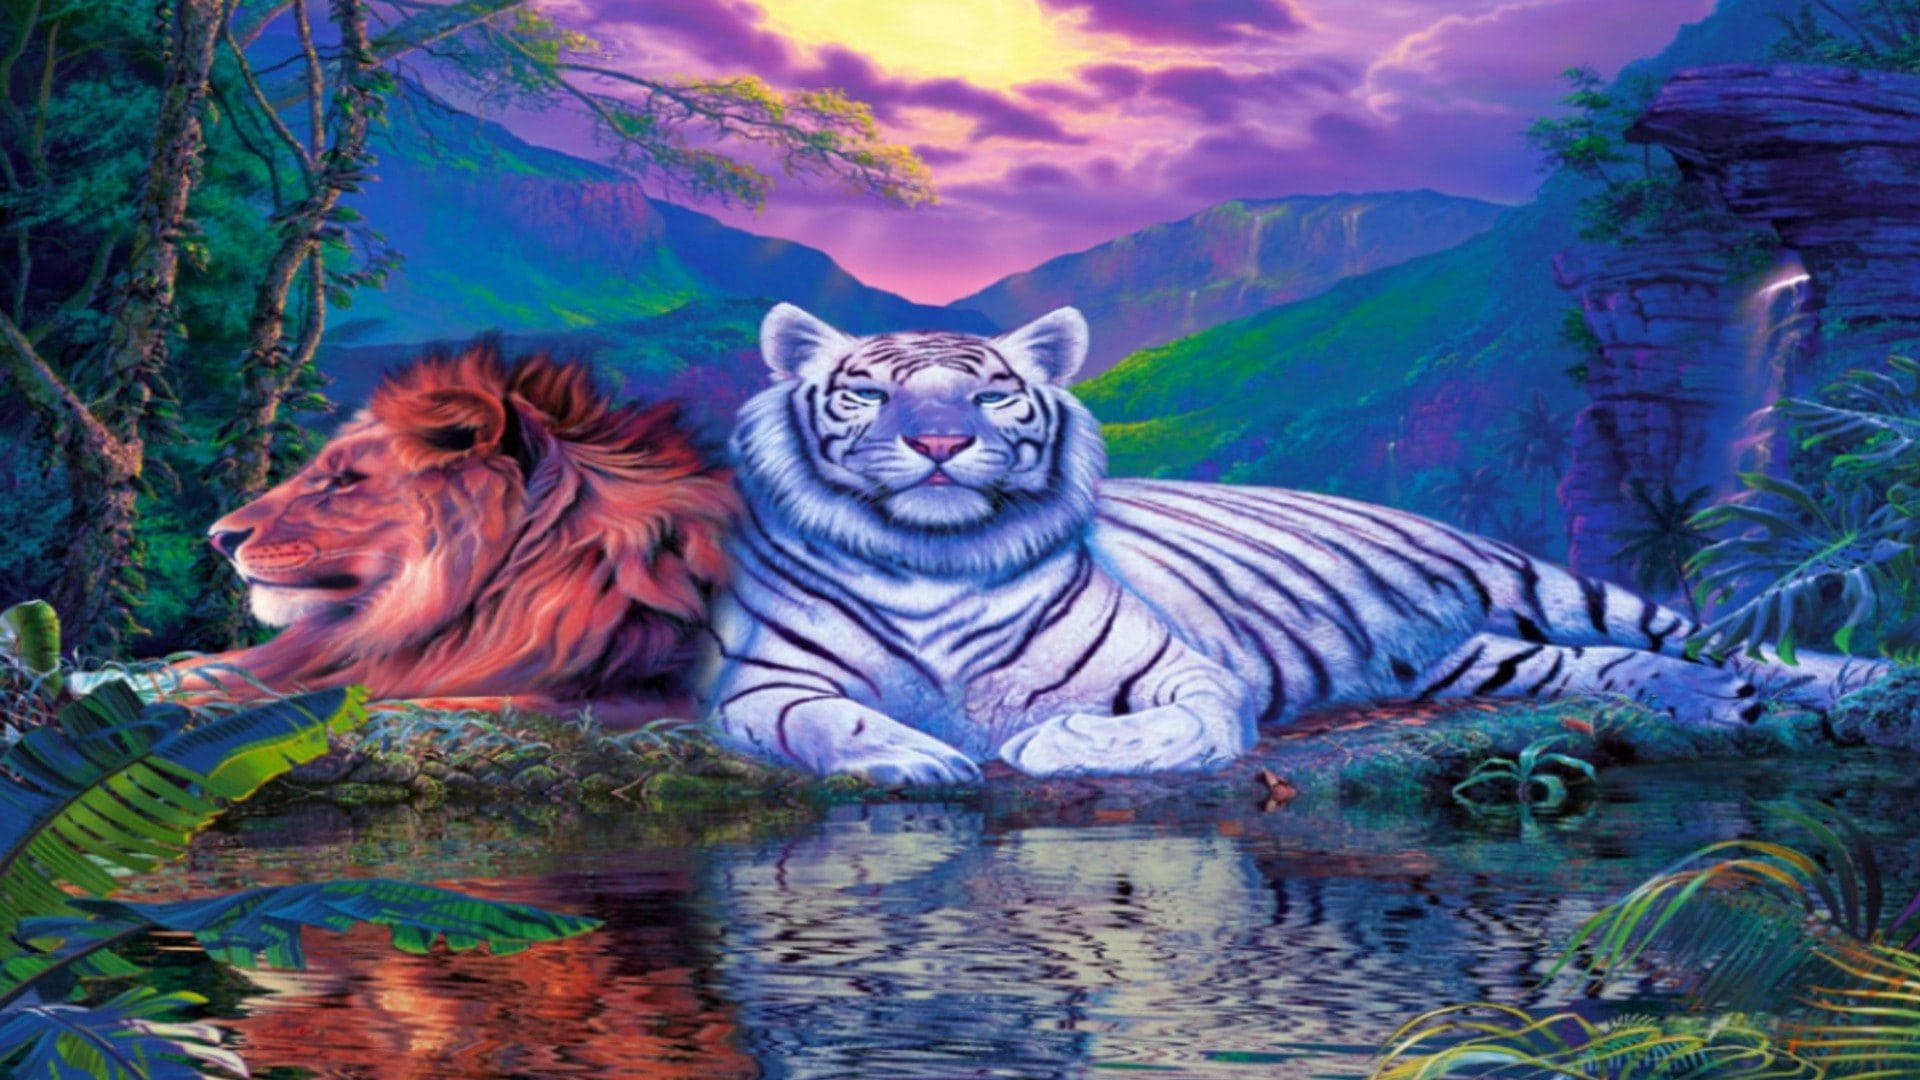 Colorful Lion And Tiger Art Wallpaper